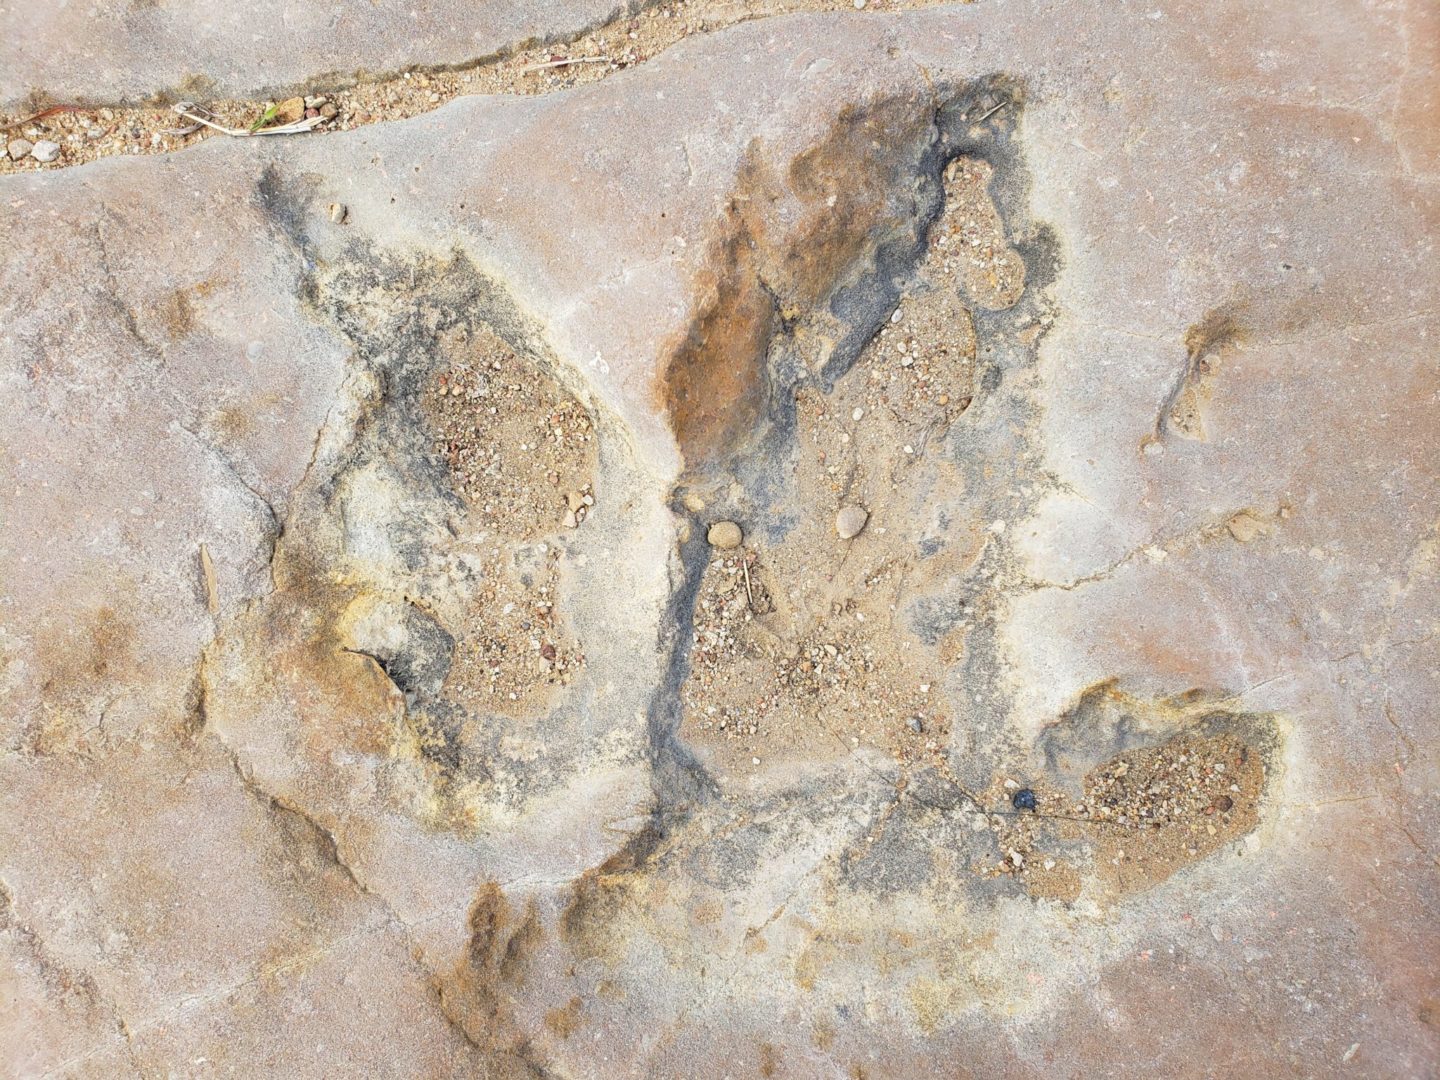 A large variety of footprints